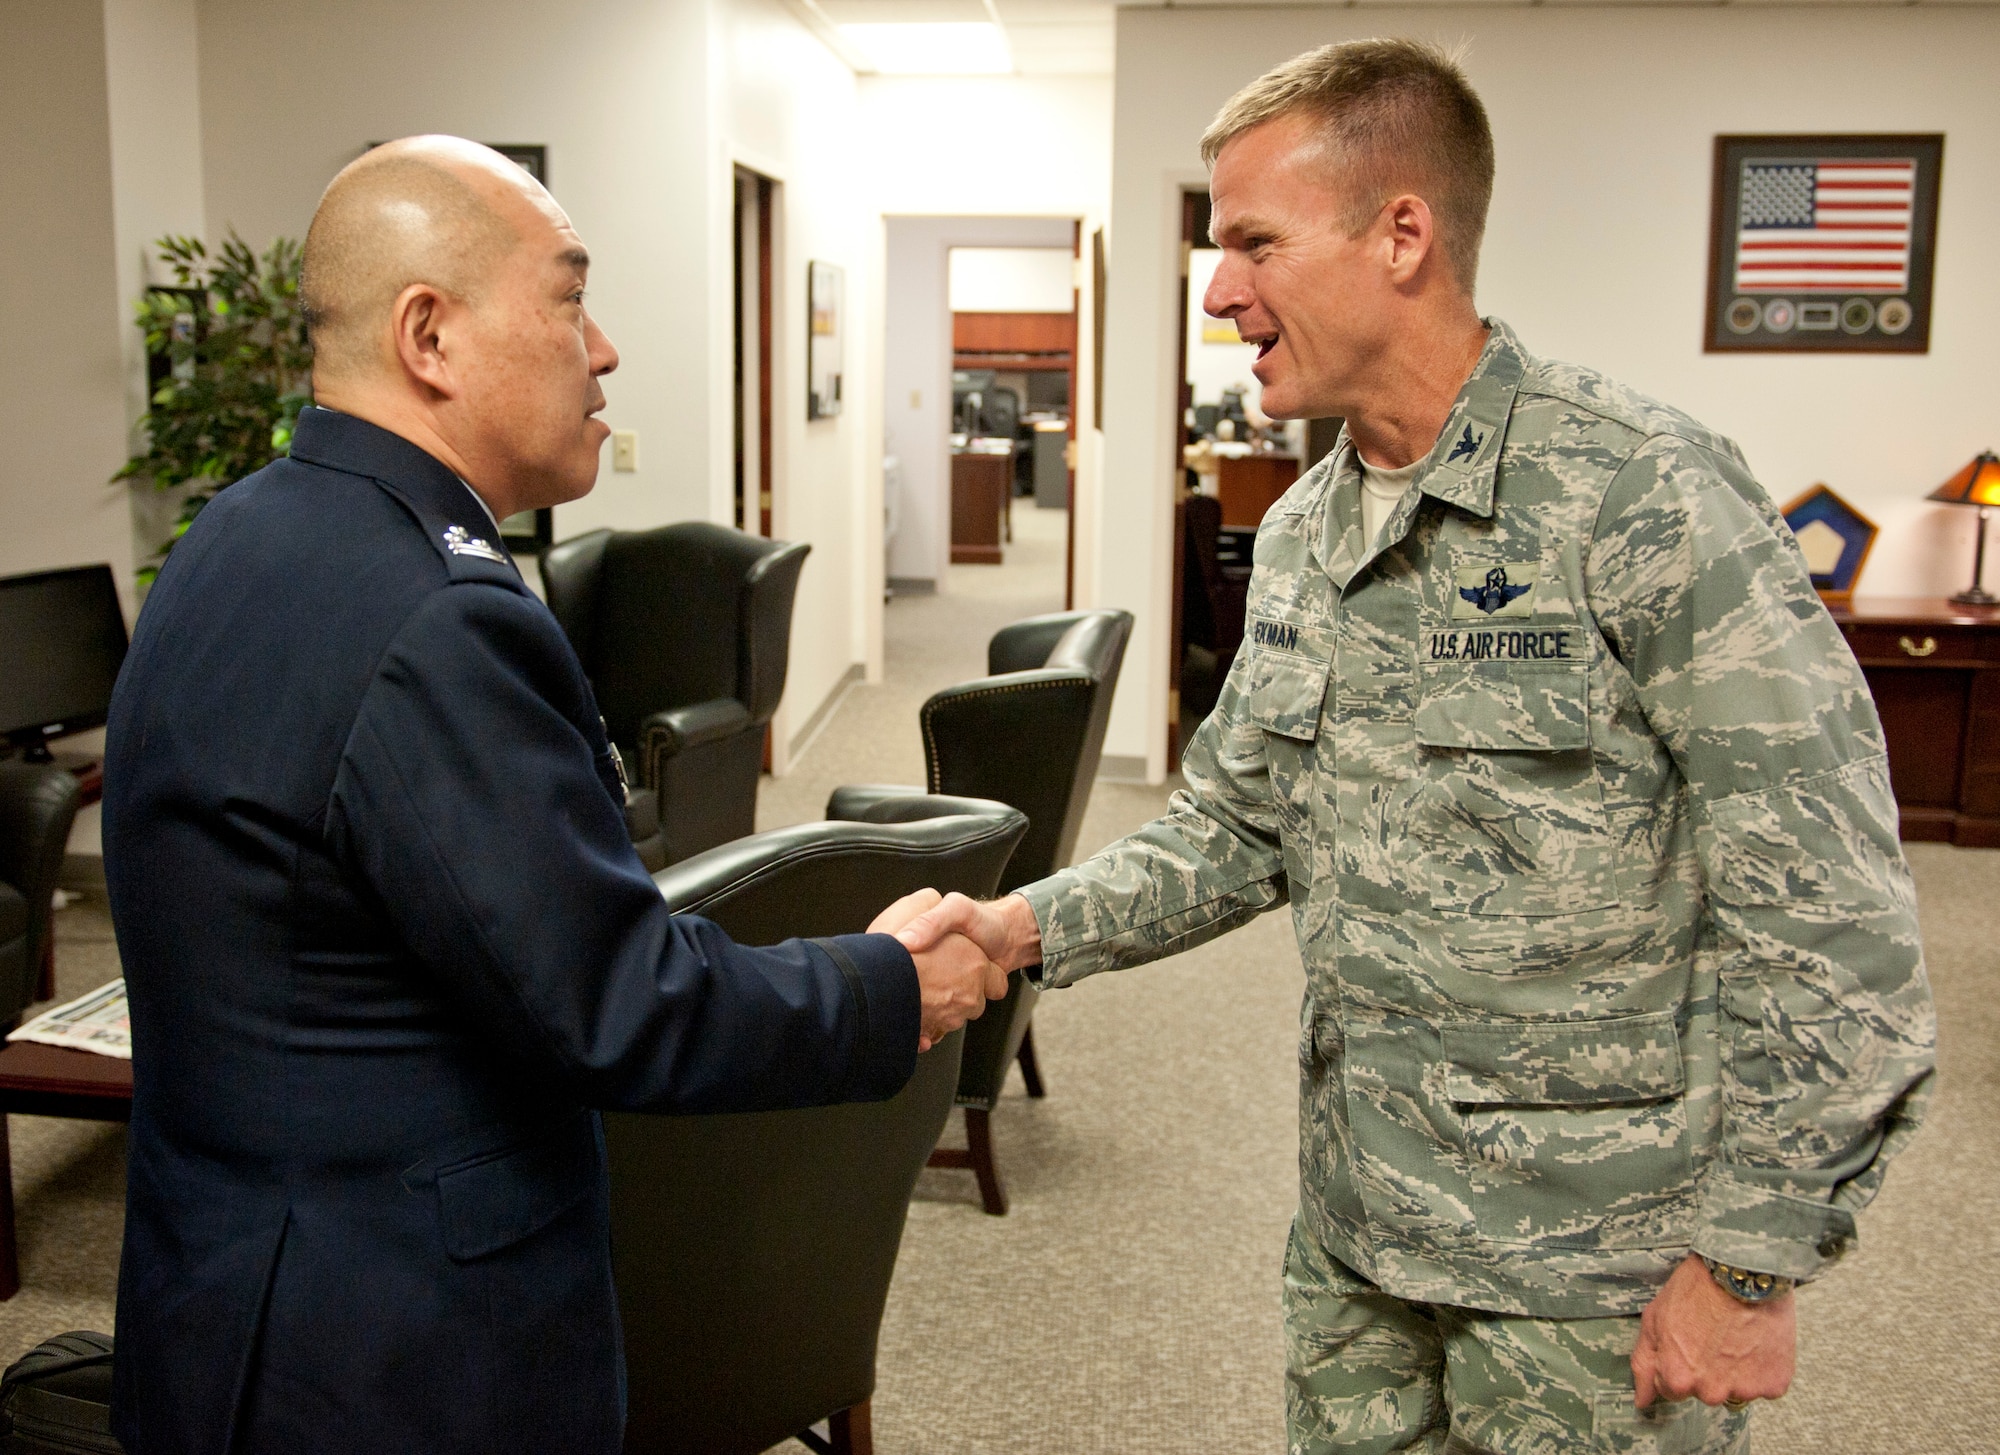 Colonel Kenneth Ekman, 49th Wing vice commander, welcomes Col. Junichi Kono, 2nd Section Weapons System Program Division chief, to Holloman Air Force Base, N.M., March 19. The Remotely Piloted Aircraft program was briefed to the members of the Japan Air Self Defense Force. Their visit to Holloman AFB was part of an effort to bolster Japanese intelligence, surveillance and reconnaissance capability. (U.S. Air Force photo by Airman 1st Class Colin Cates/Released) 